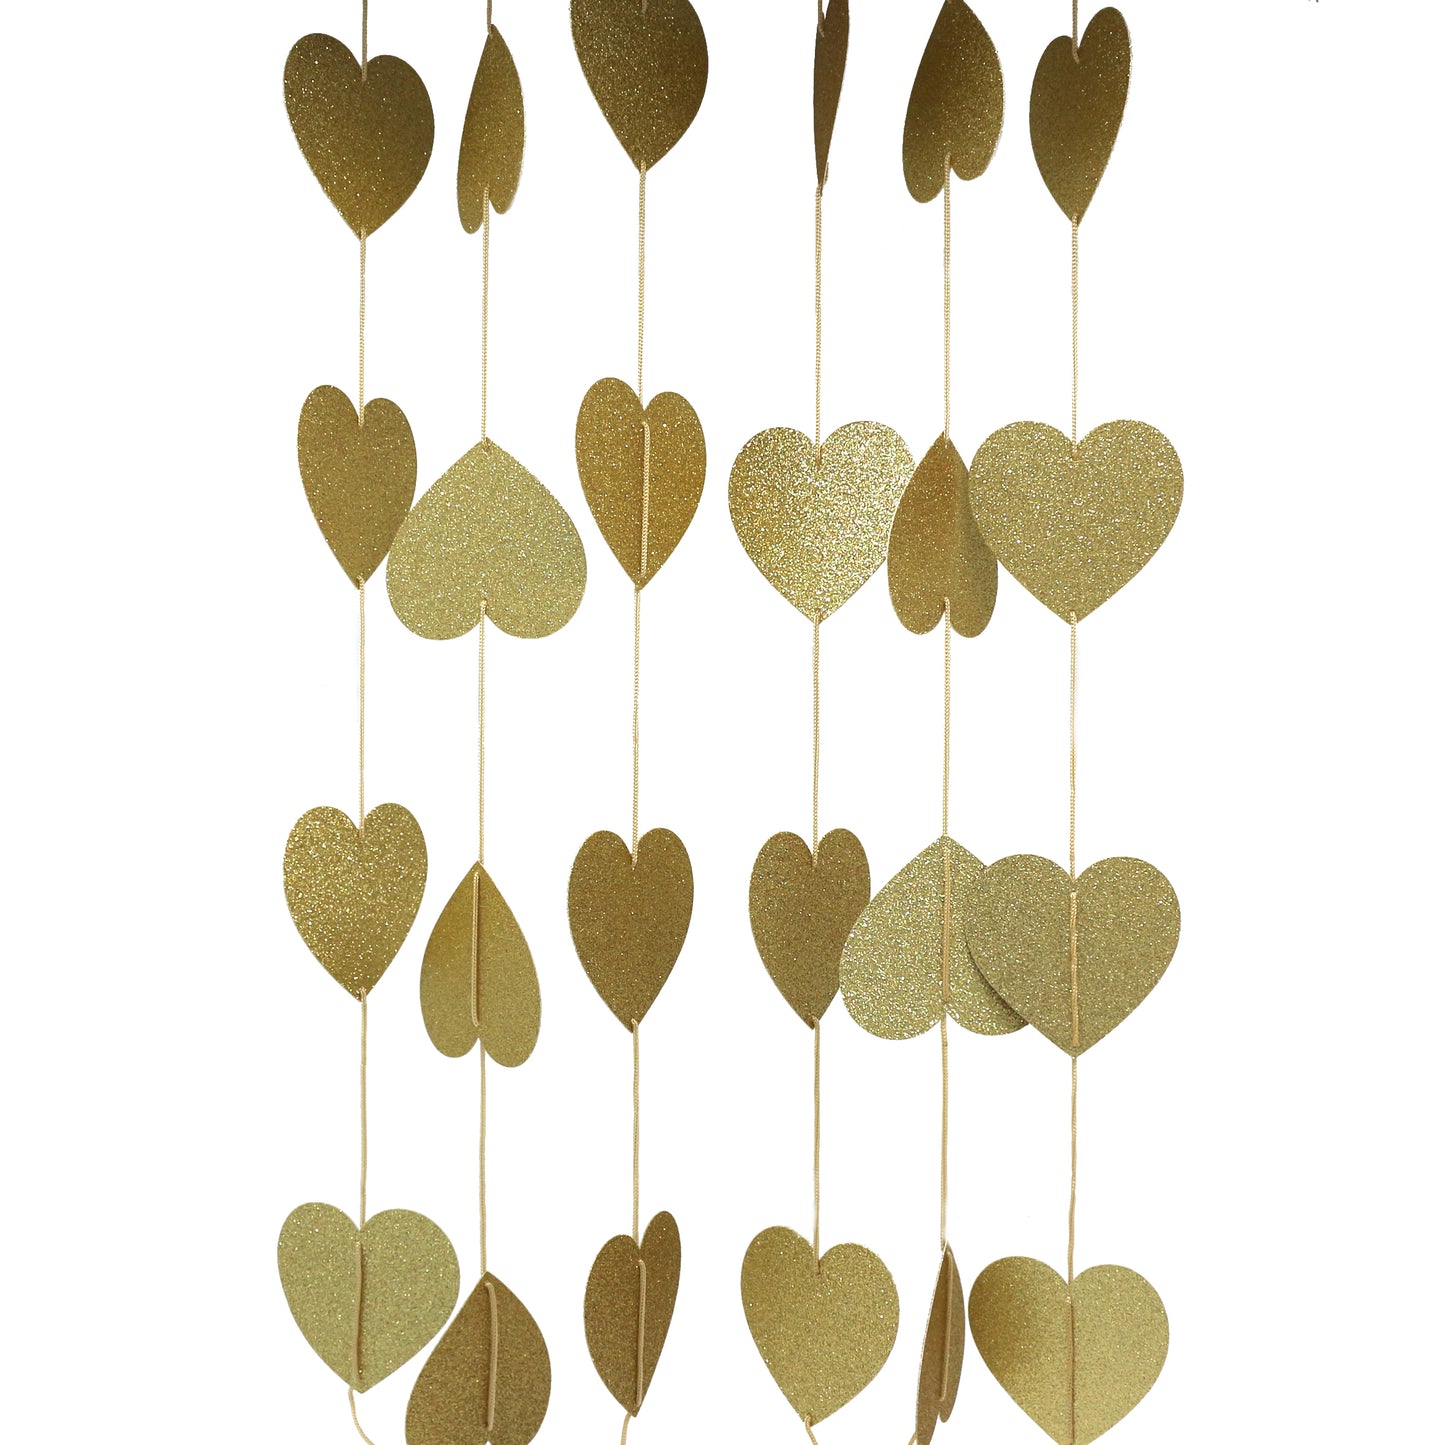 CVHOMEDECO. Golden Glittered Paper Heart Shape String Garland Hanging Décor for Wedding Birthday Party Festival Home Background Decorative, 8.2 feet, Pack of 2 PCS